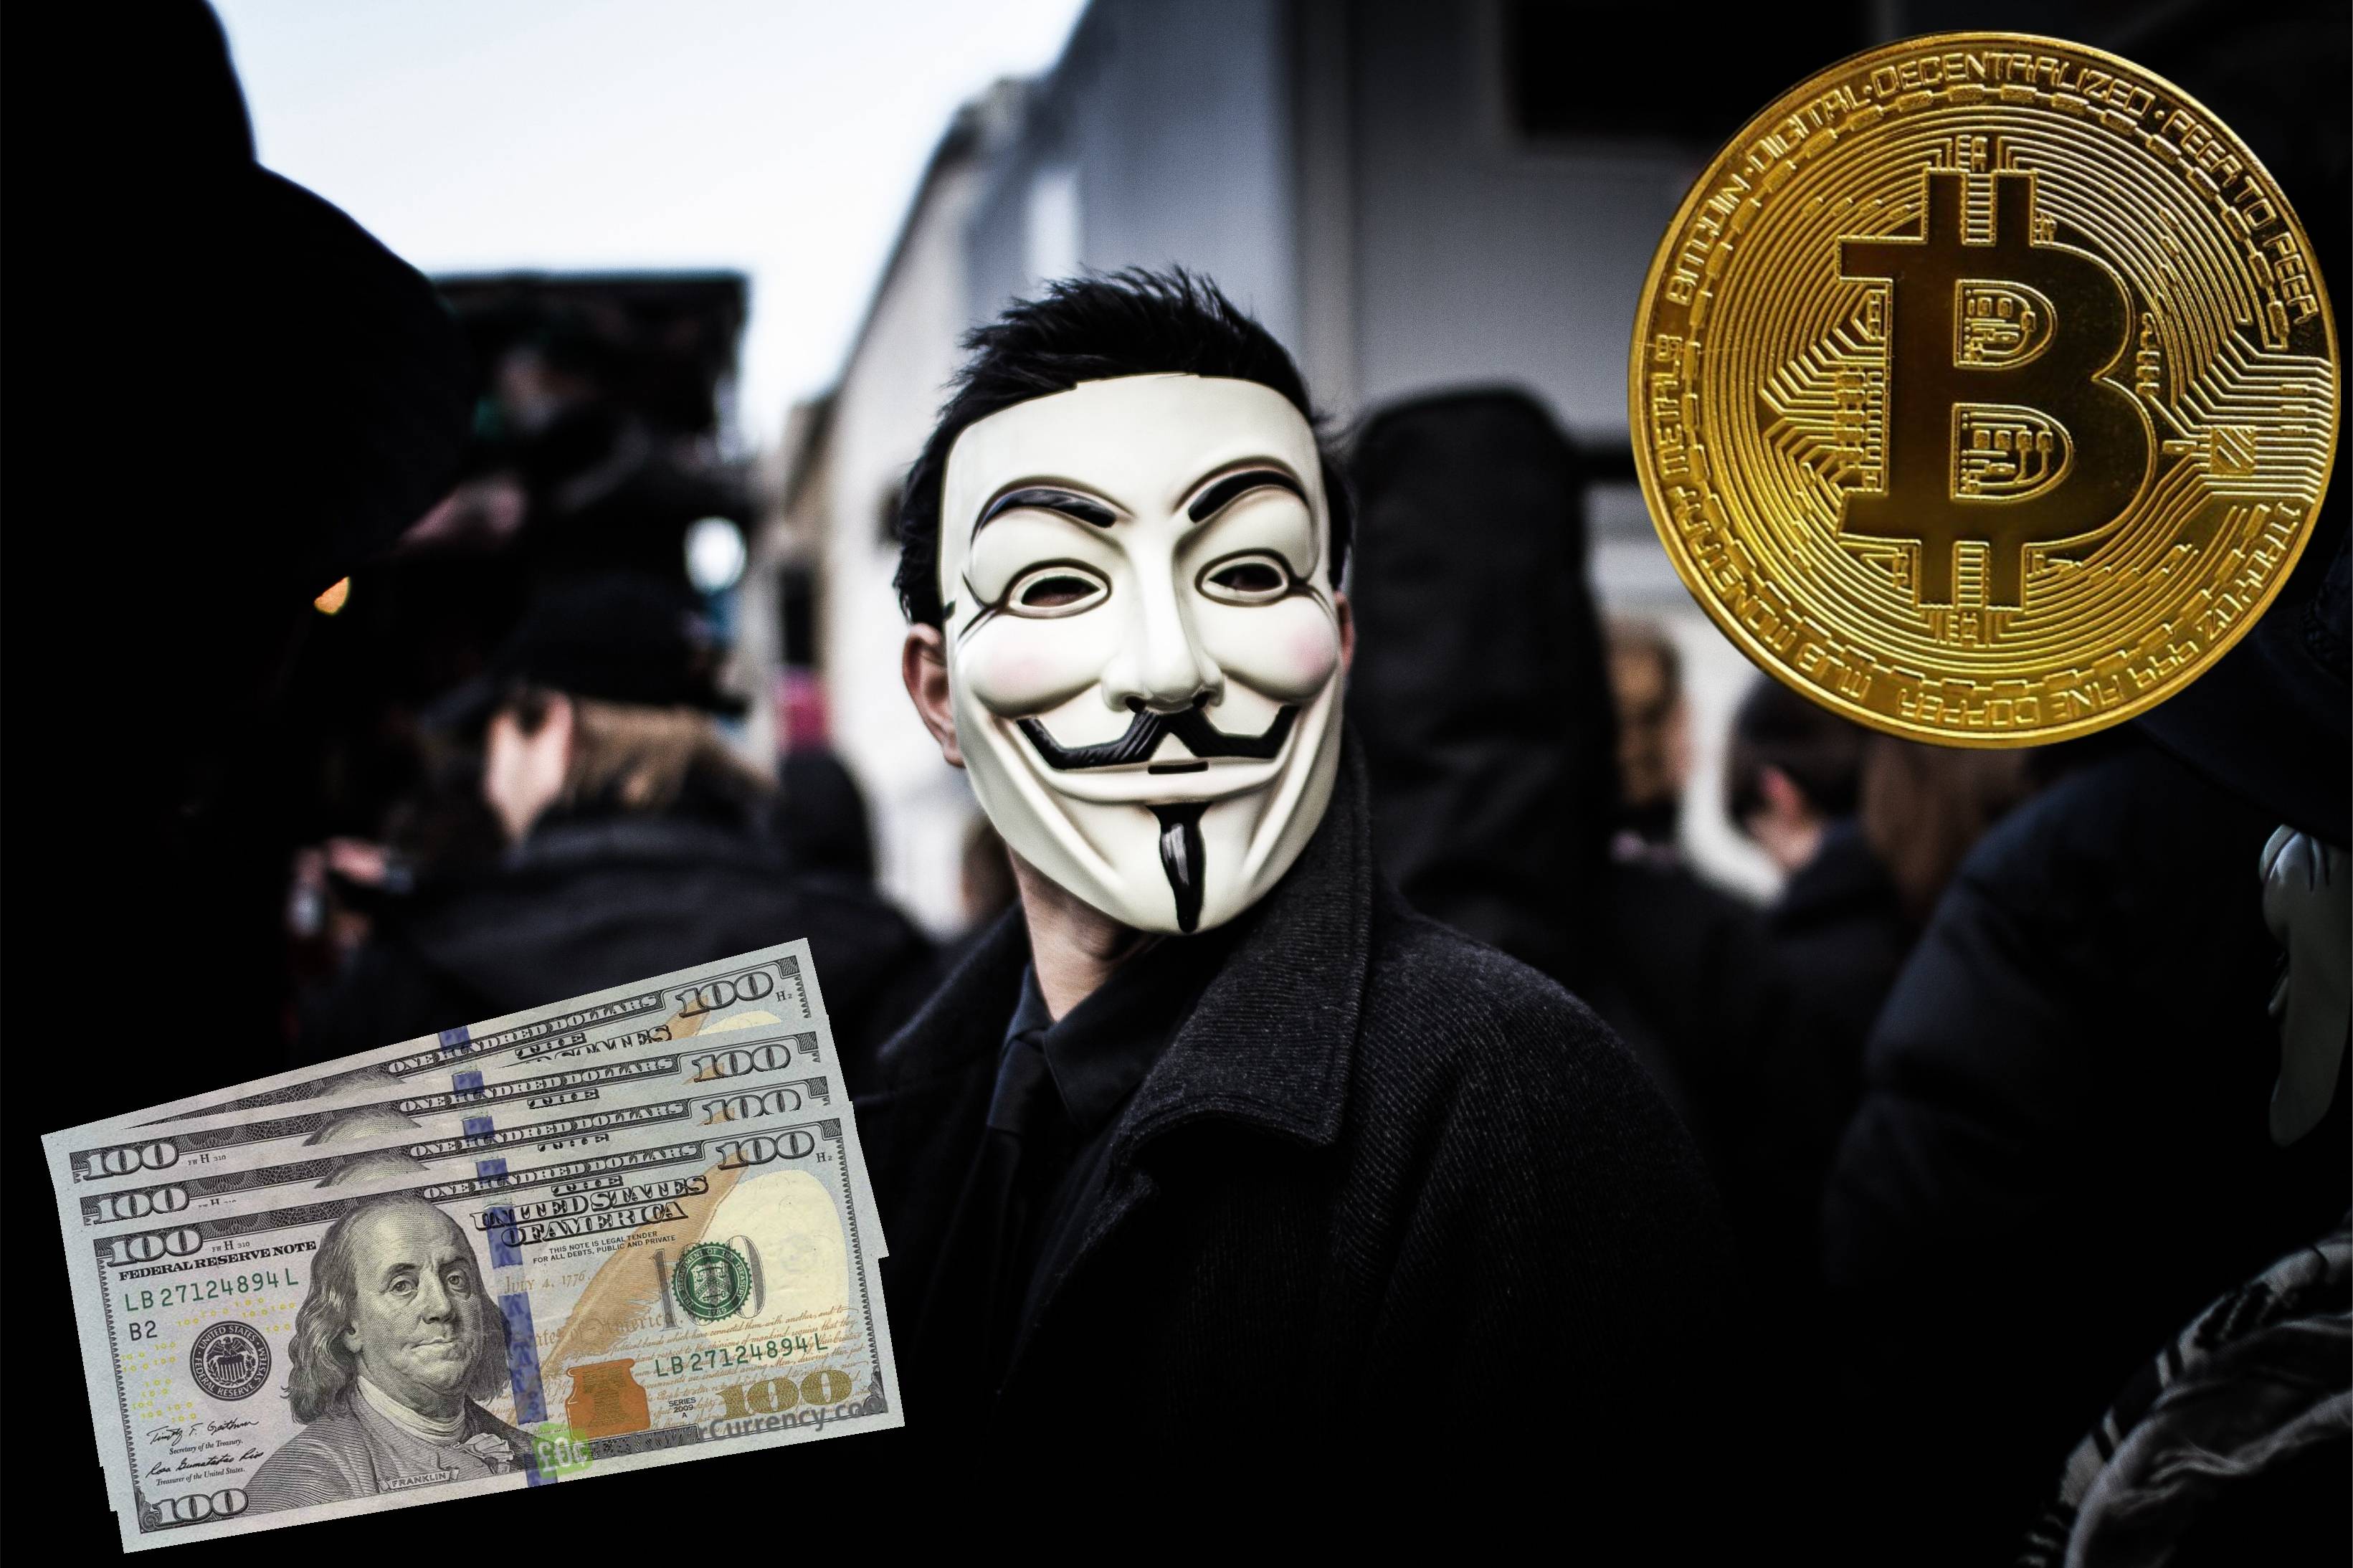 can you buy bitcoins anonymously